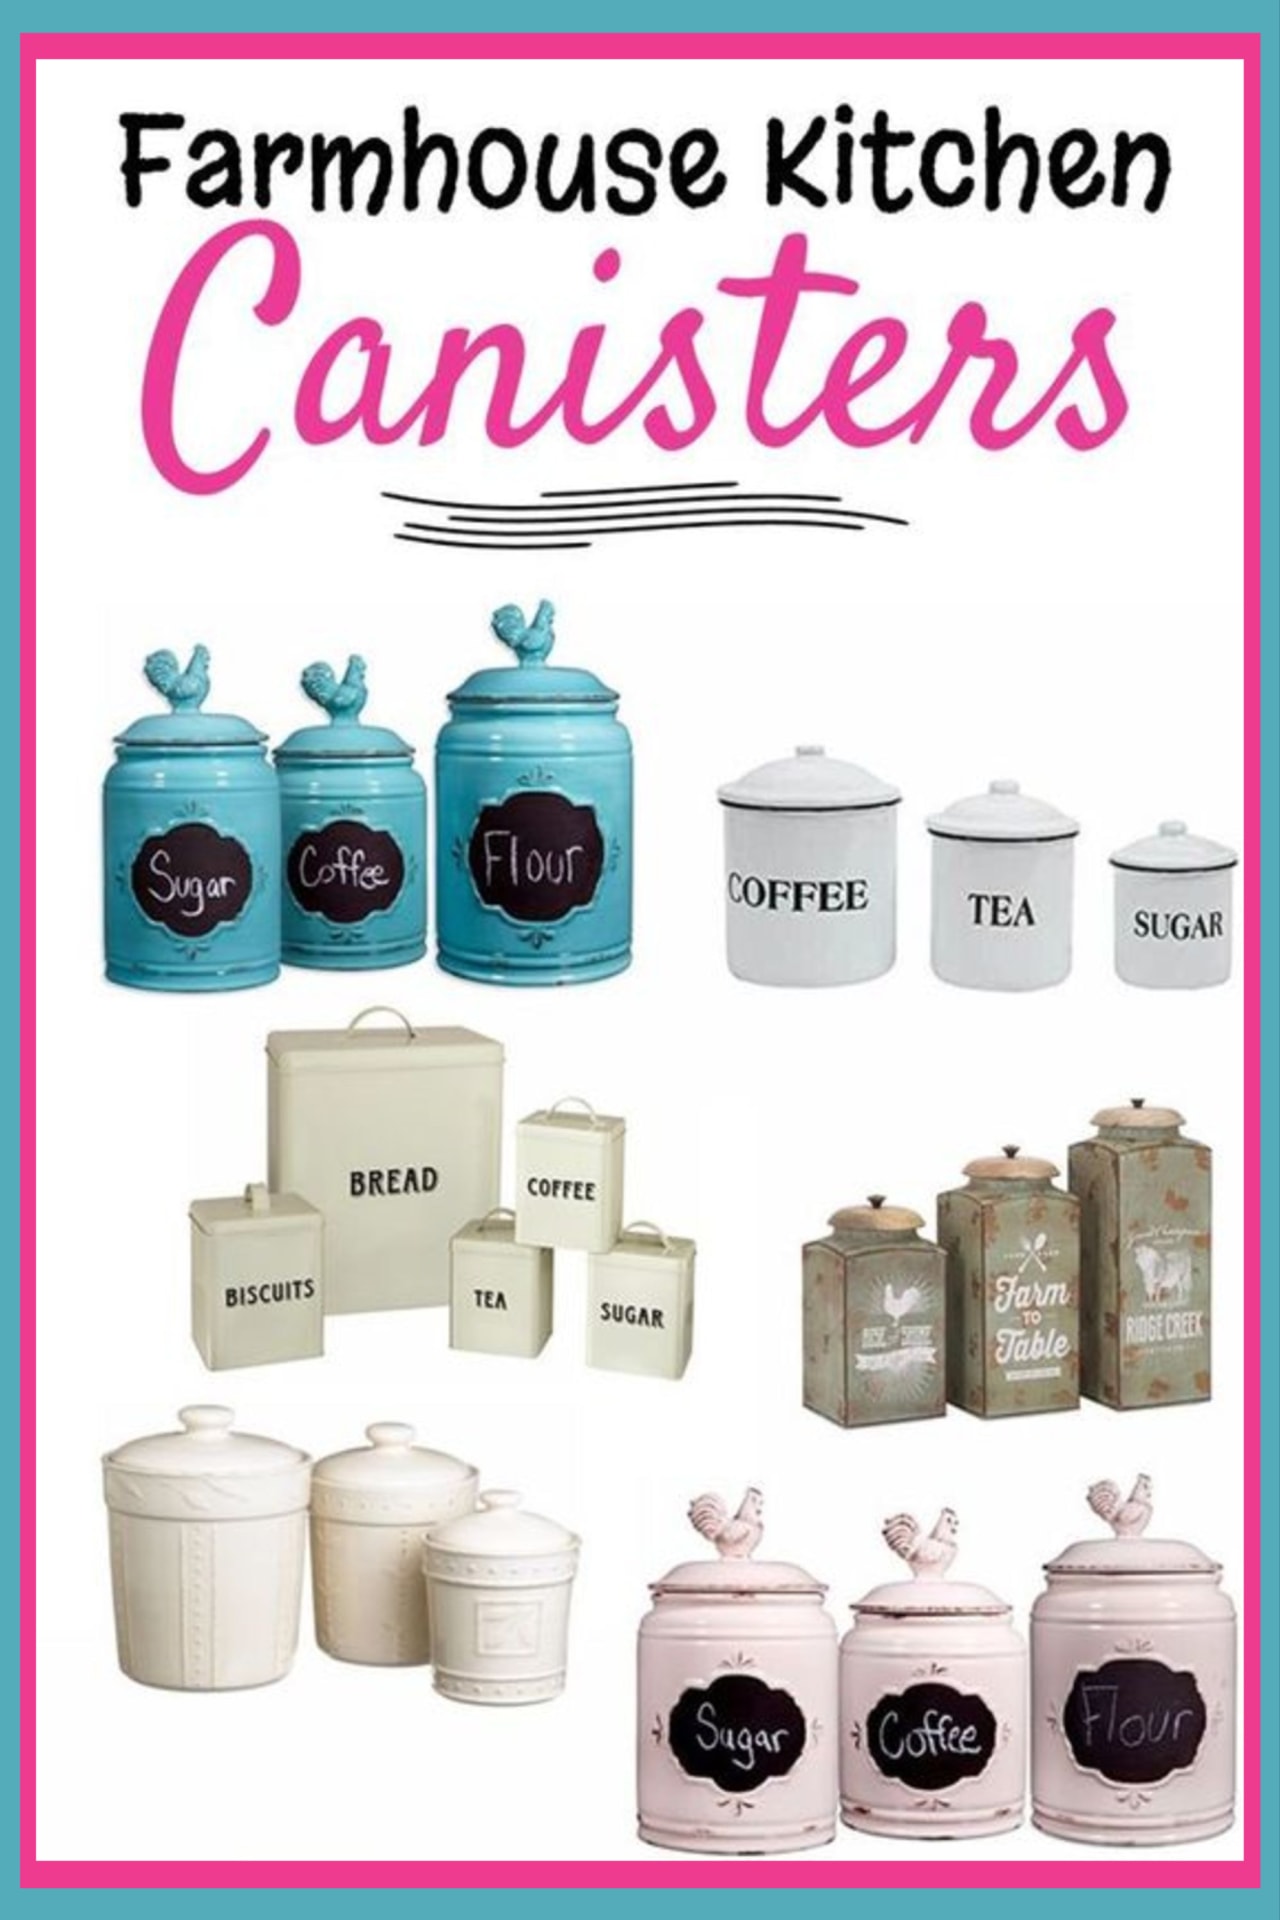 Country cottage kitchens - country cottage kitchen canisters for decorating your kitchen on a budget